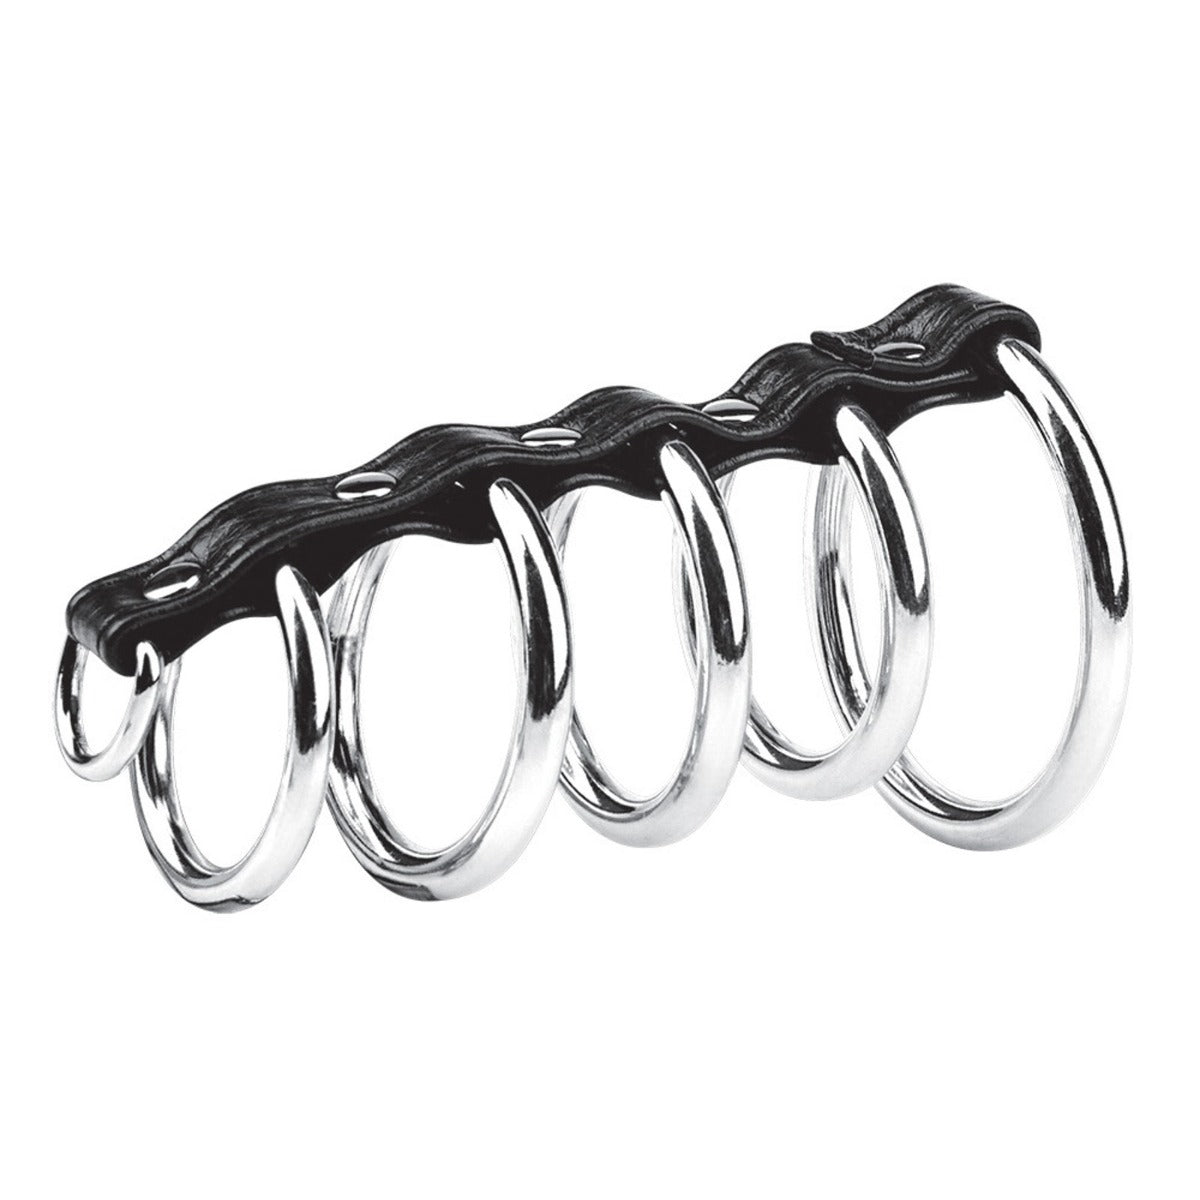 Blue Line 5 Gates Of Hell Metal Cock Ring With D Ring For Lead Black - Simply Pleasure